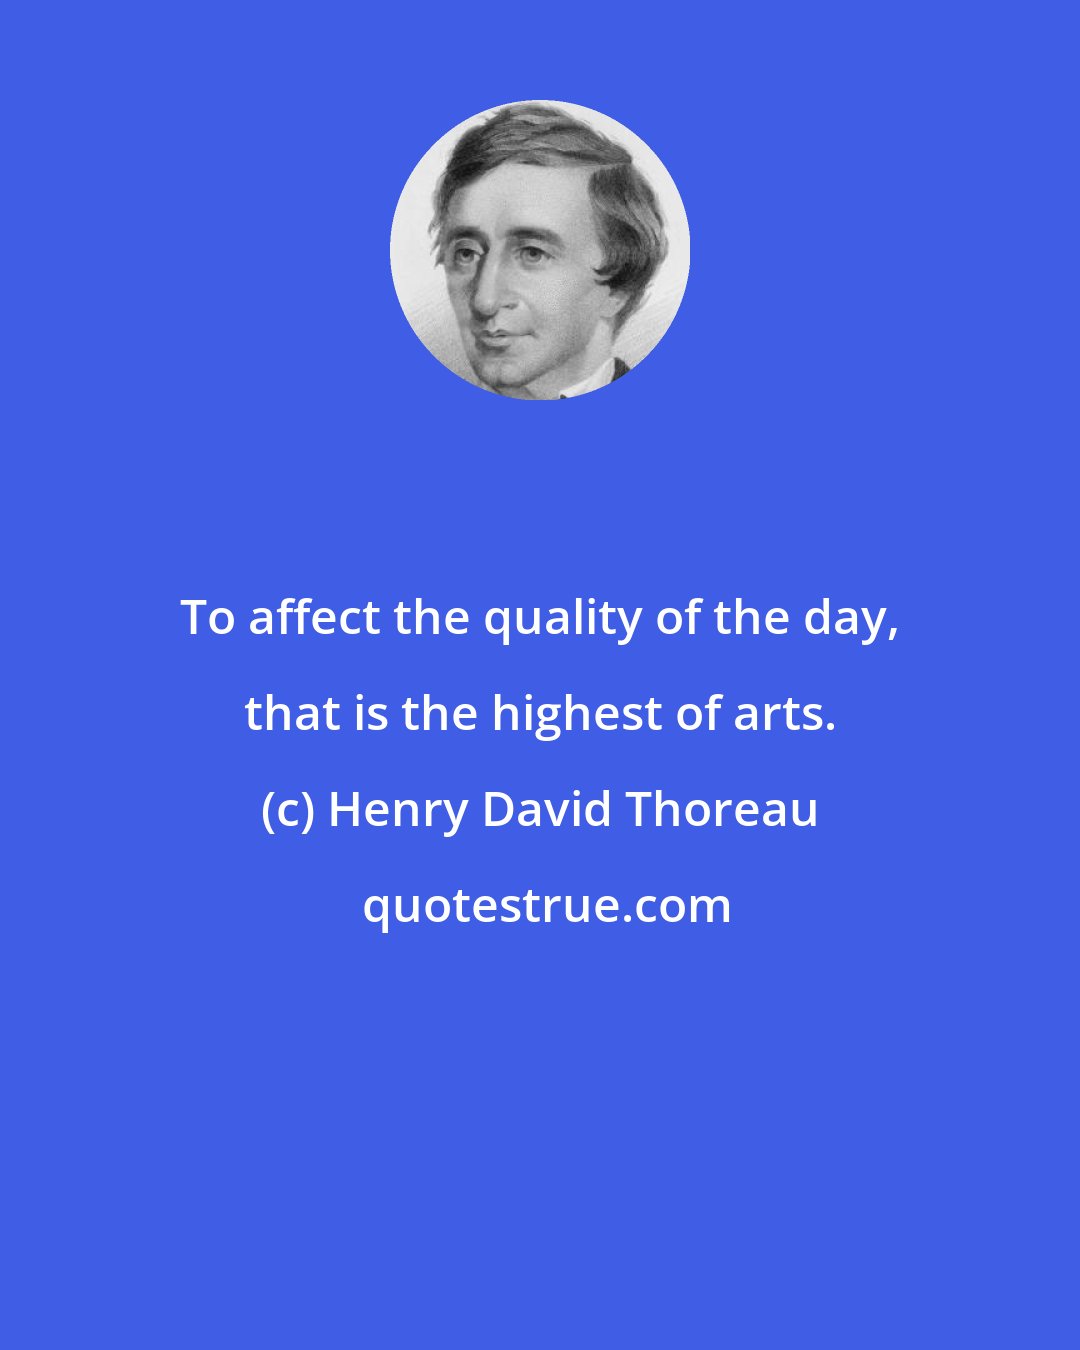 Henry David Thoreau: To affect the quality of the day, that is the highest of arts.